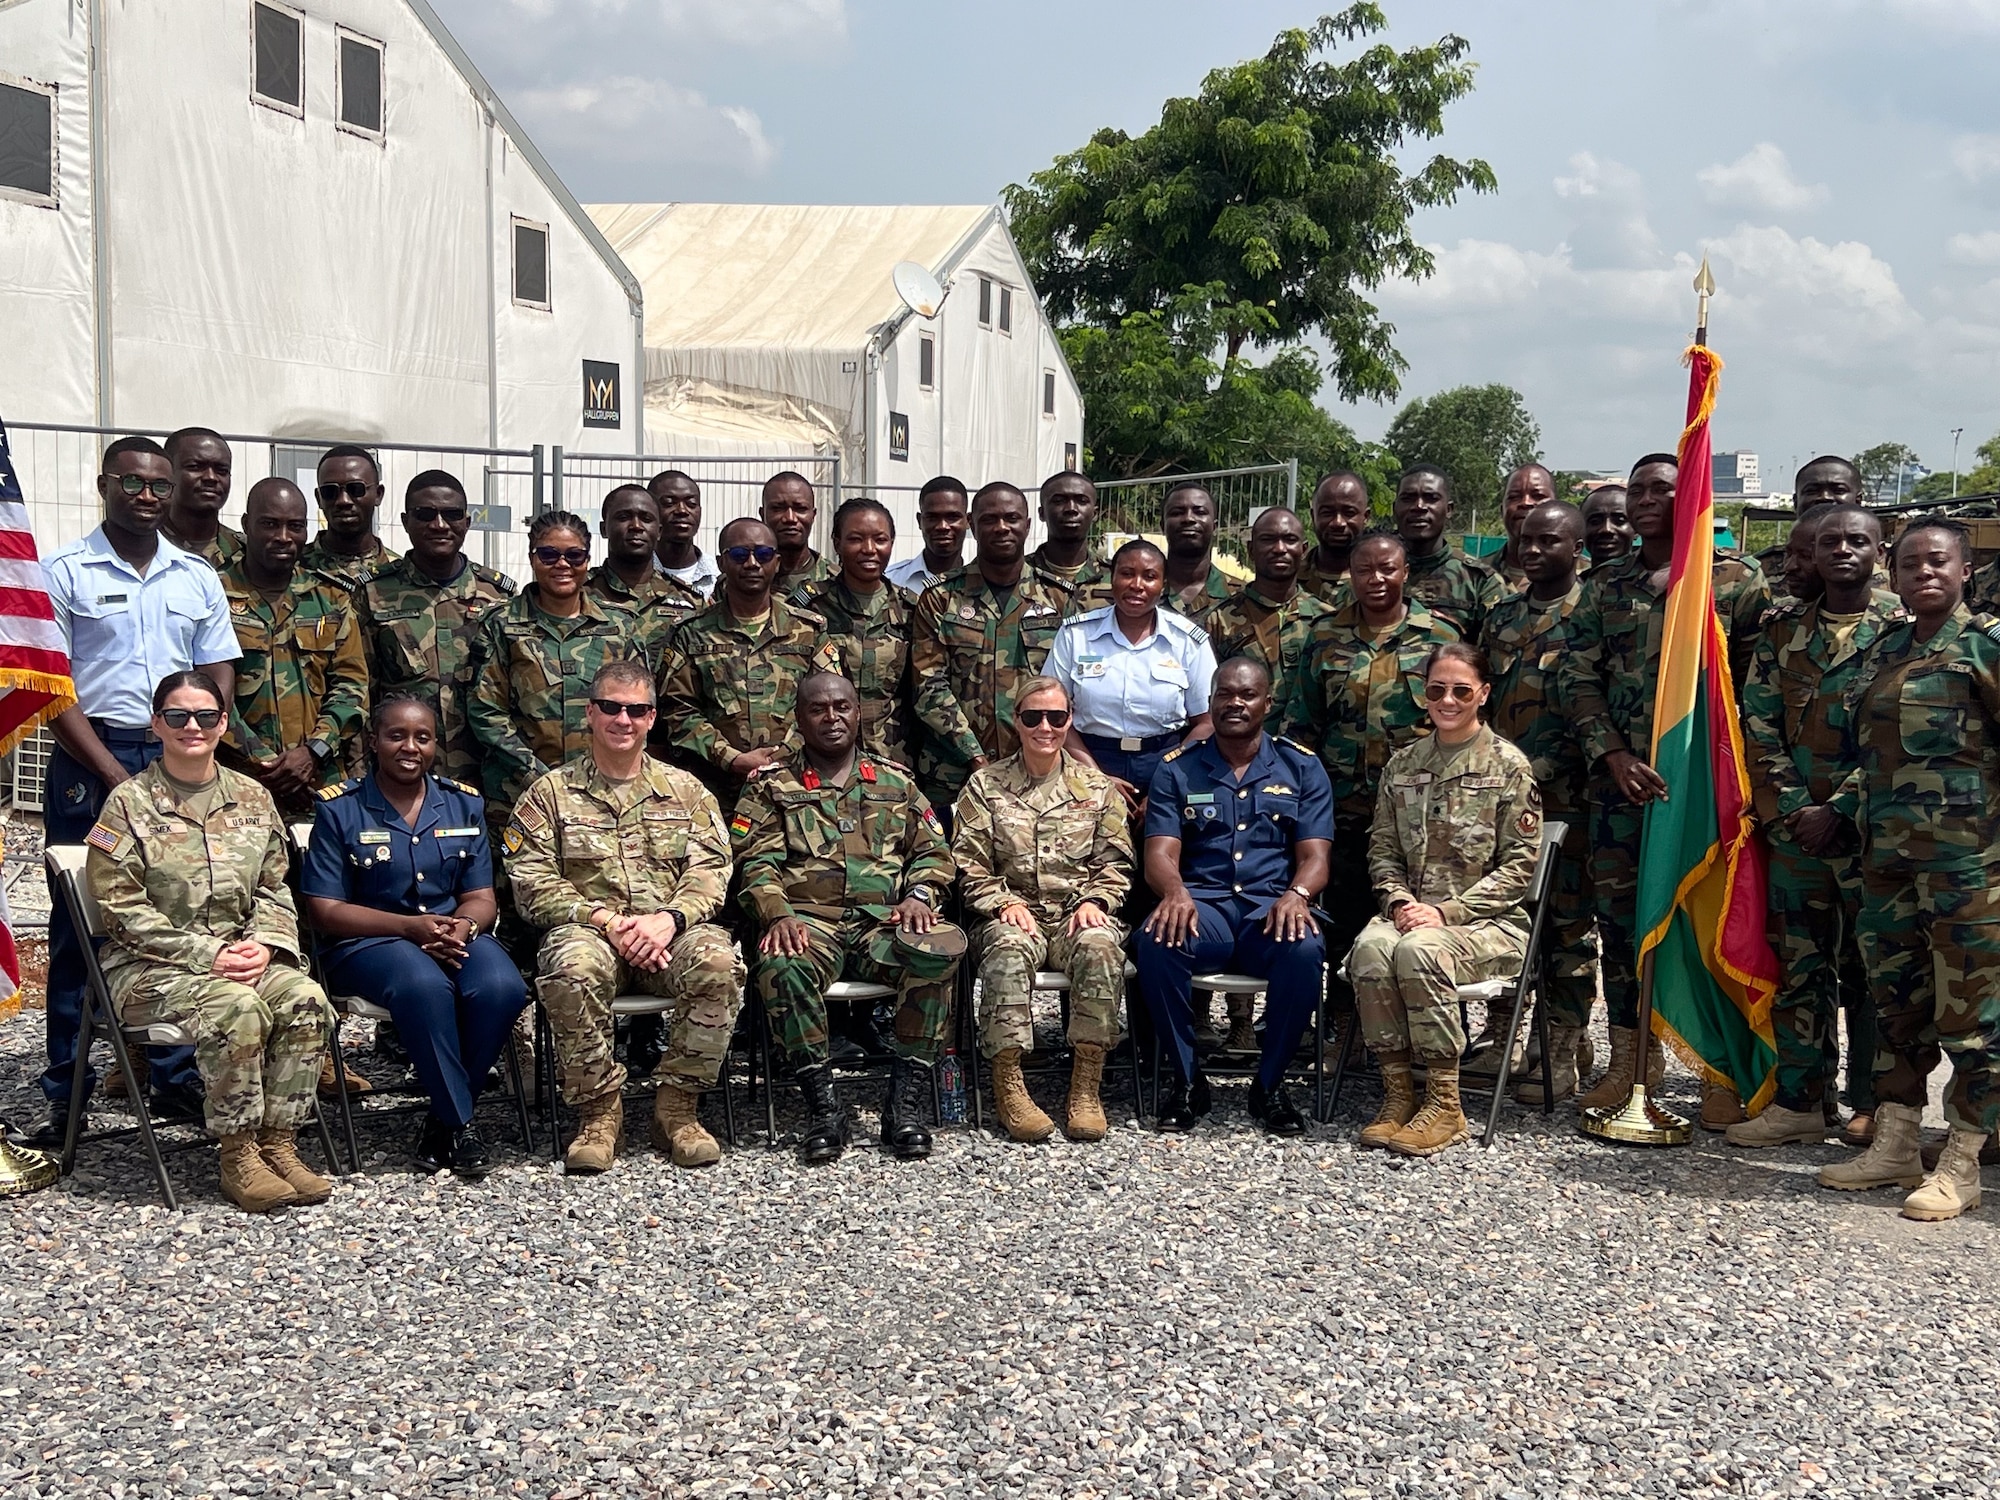 Ghana Armed Forces personnel are joined by U.S. Air Force medical personnel and U.S. Embassy representatives on the graduation day to mark the completion of a train-the-trainer event in Accra, Ghana, in early May. The training was part of the GAF’s pursuit of United Nations validation of its Aeromedical Evacuation Team capabilities. (Courtesy photo)